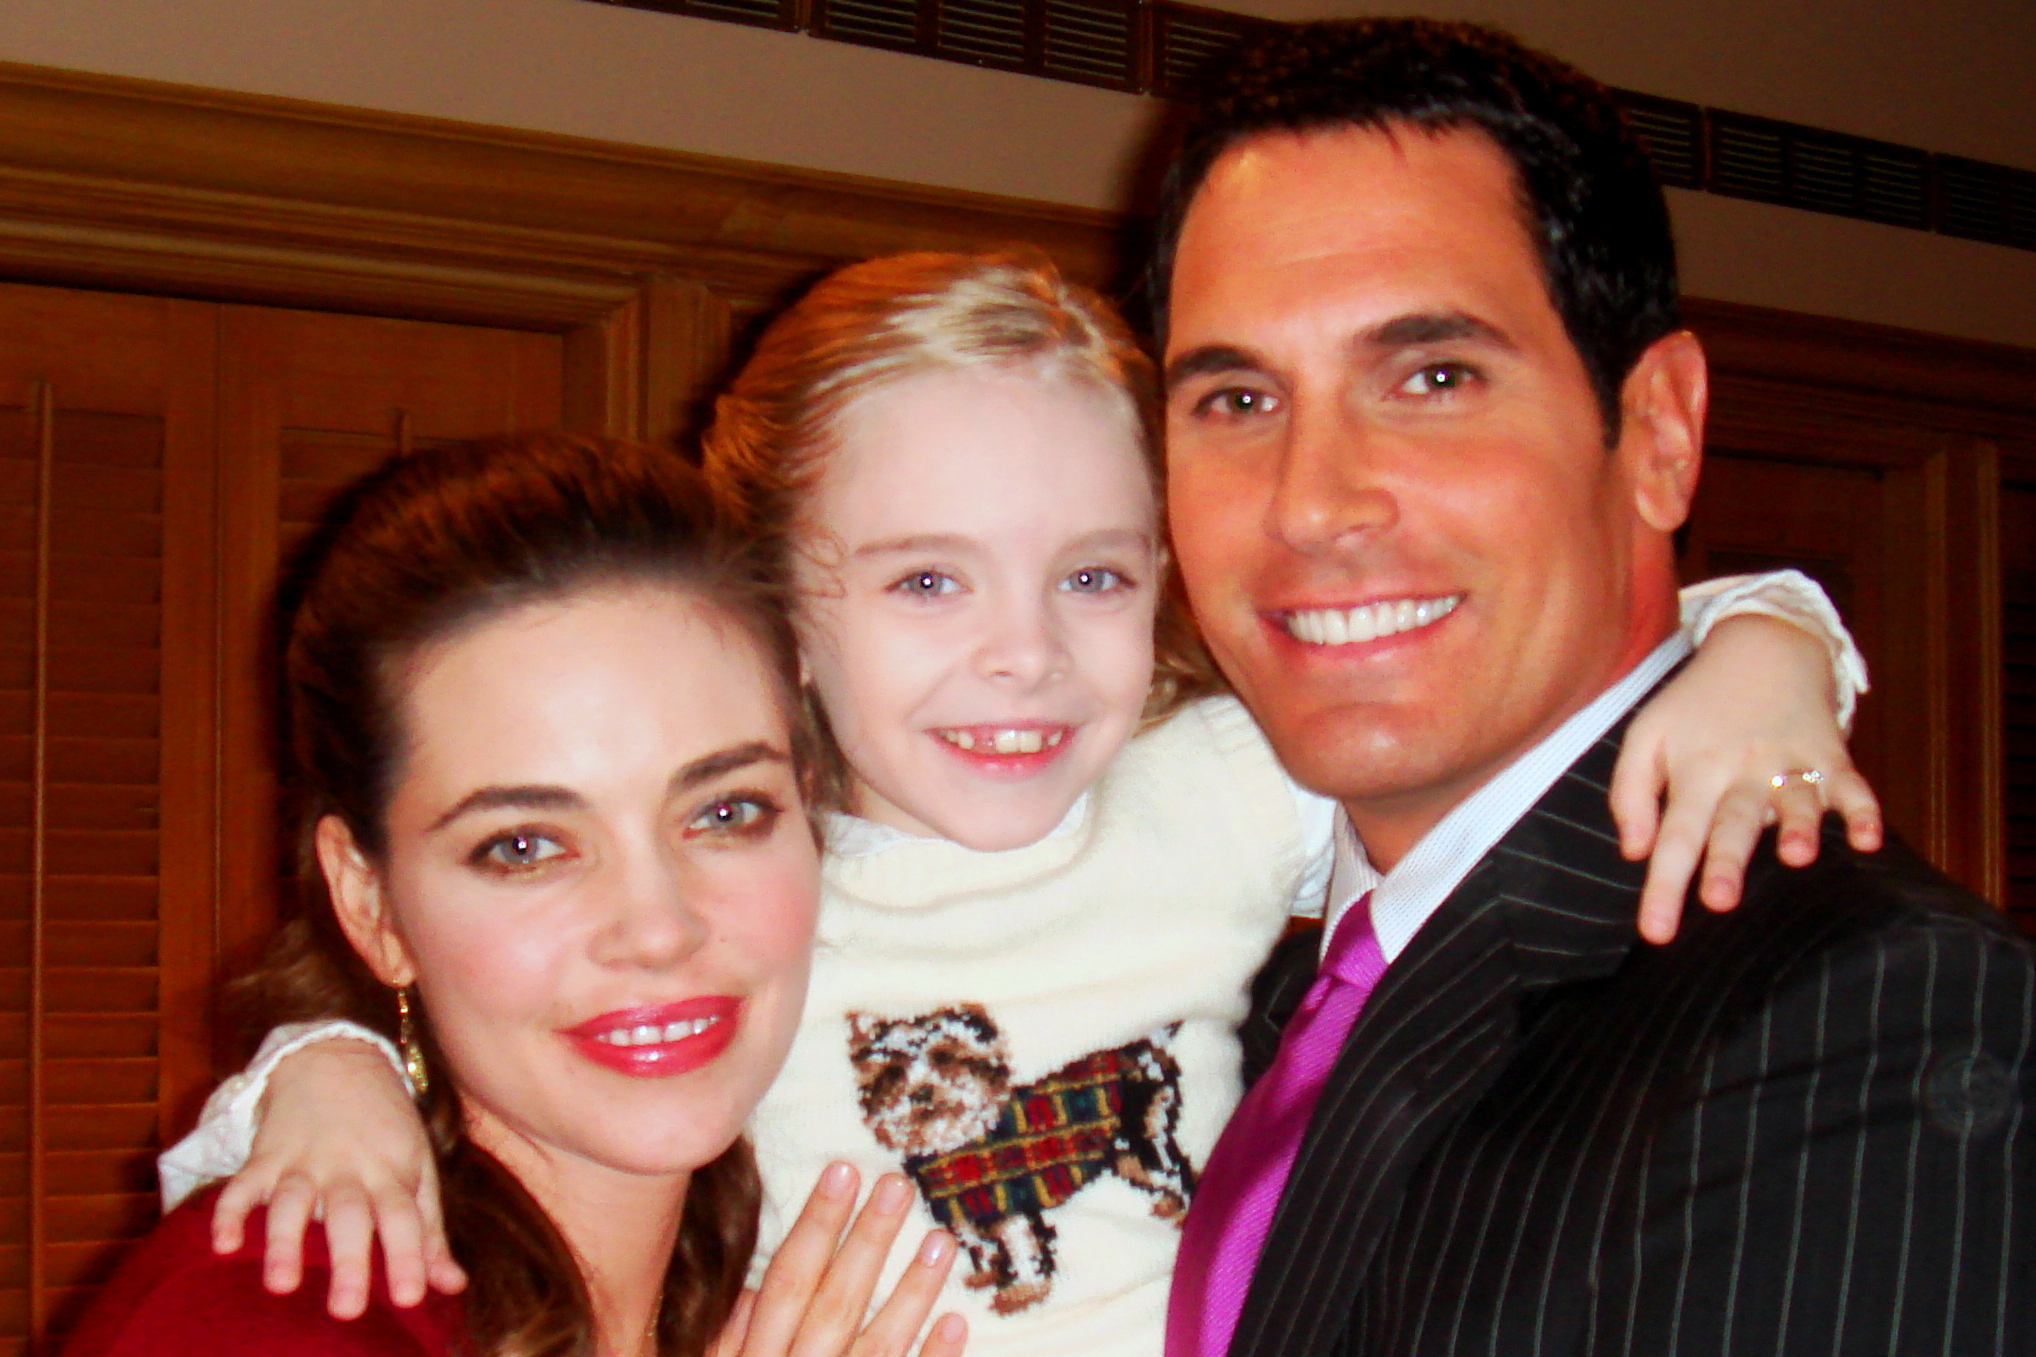 Amelia Heinle, Darcy Rose Byrnes and Don Diamont (The Young and the Restless, 2006)